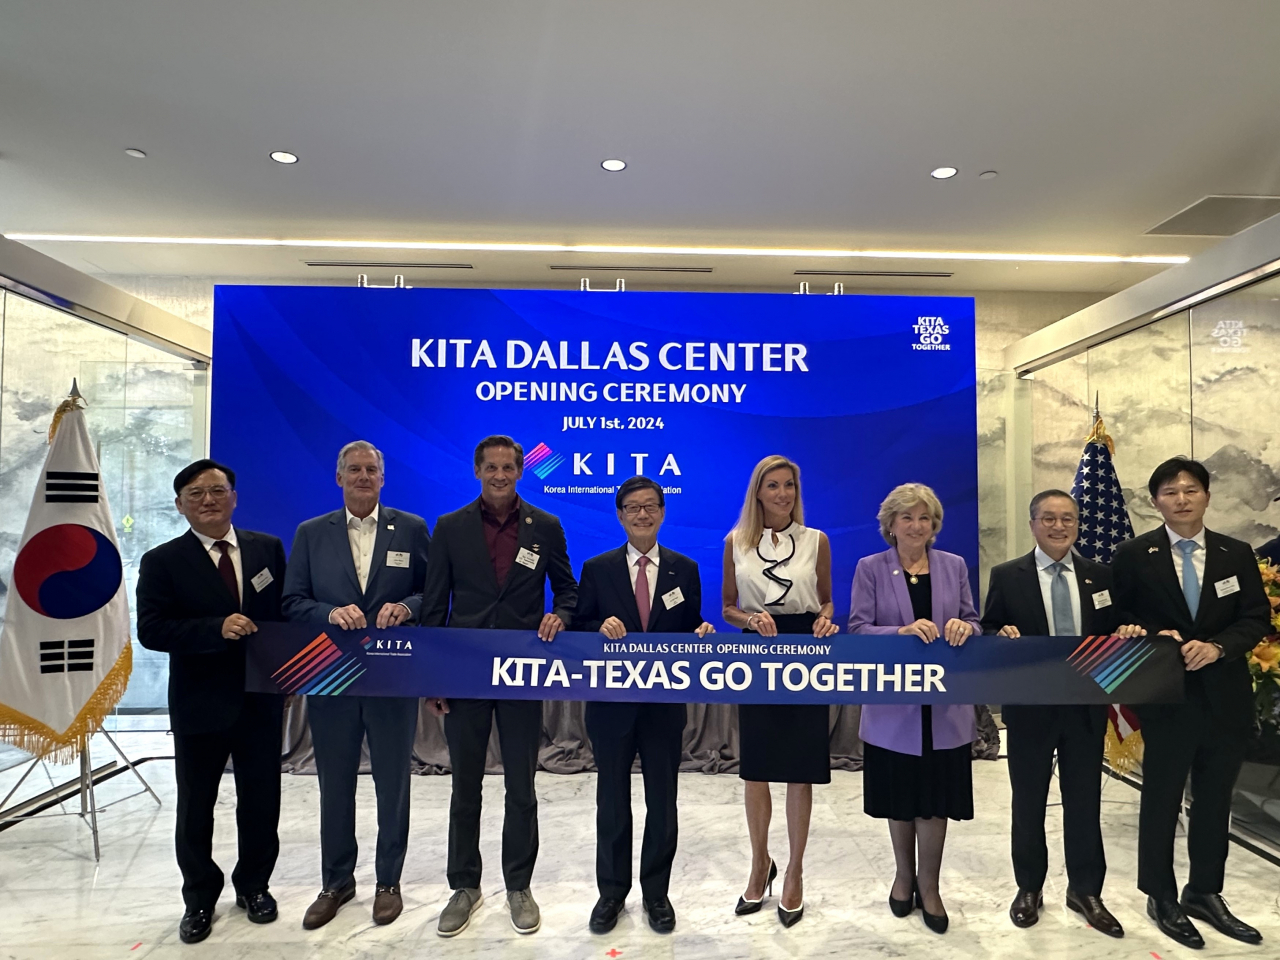 KITA Chairman Yoo Jin-sik (fourth from left), Mayor of Plano, Texas John B. Muns (second from left), and other officials from South Korea and the US pose for a photo to celebrate the opening of KITA’s new US office in Dallas, Texas on Monday. (KITA)